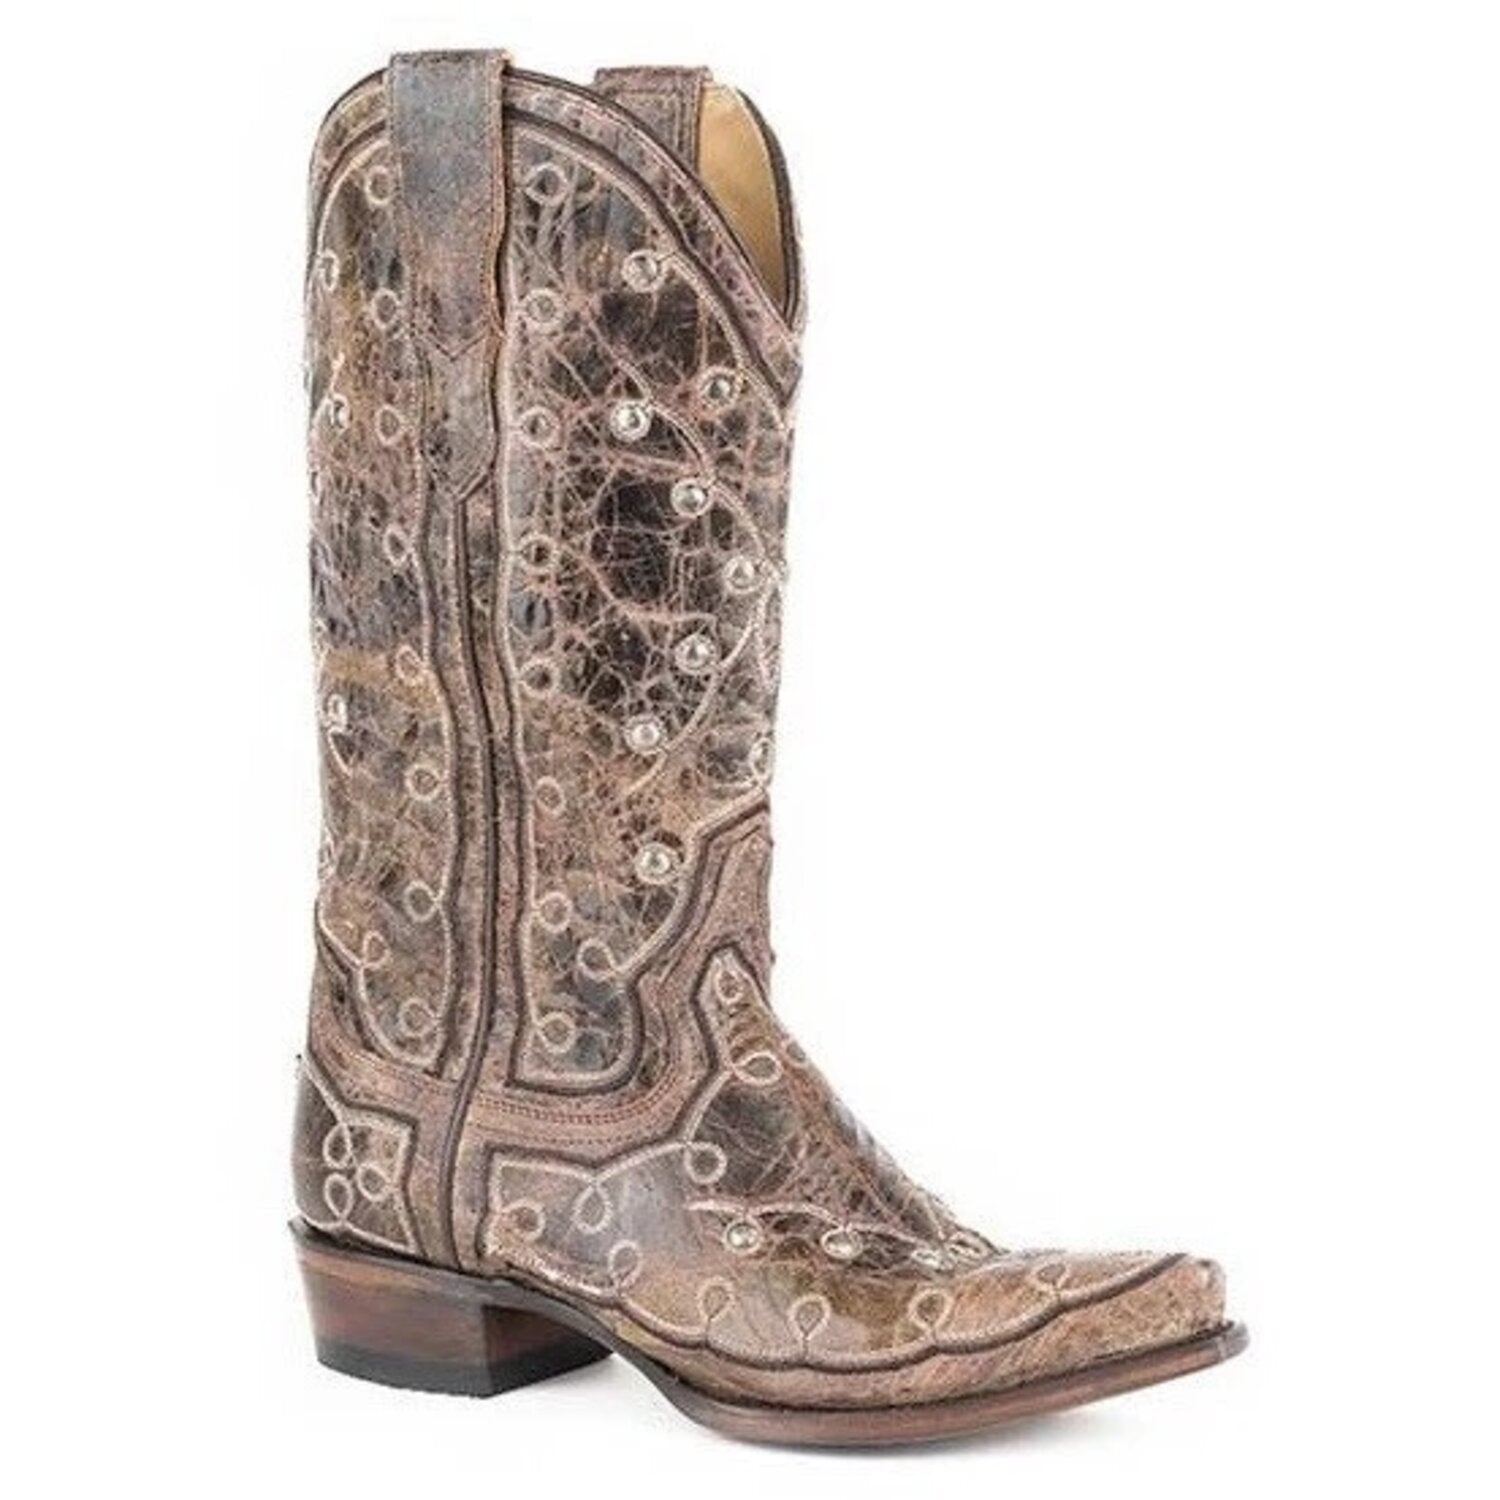 Women's Stetson Pita Boots Snip Toe Handcrafted Brown - yeehawcowboy